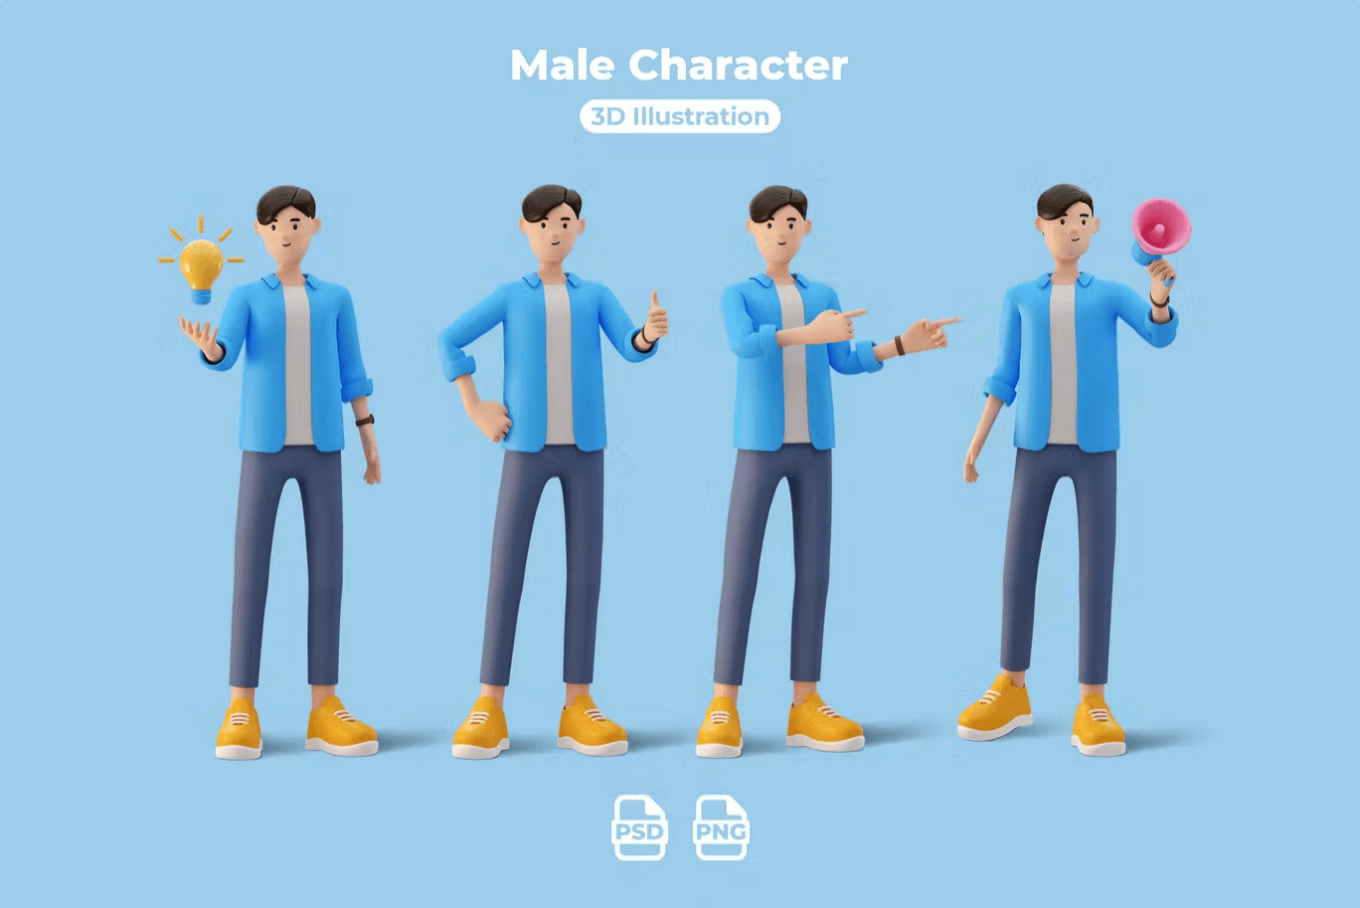 Sky blue background with sky blue background and four illustrated 3D male figures. Each figure is of the same man. He is caucasian with dark brown hair, a blue shirt with a white t-shirt underneath. He is wearing dark grey pants and yellow sneakers. From left to right: the first figure is holding a lightbulb, the second is giving a thumbs up, the third is pointing finger guns, and the last is holding a pink megaphone.